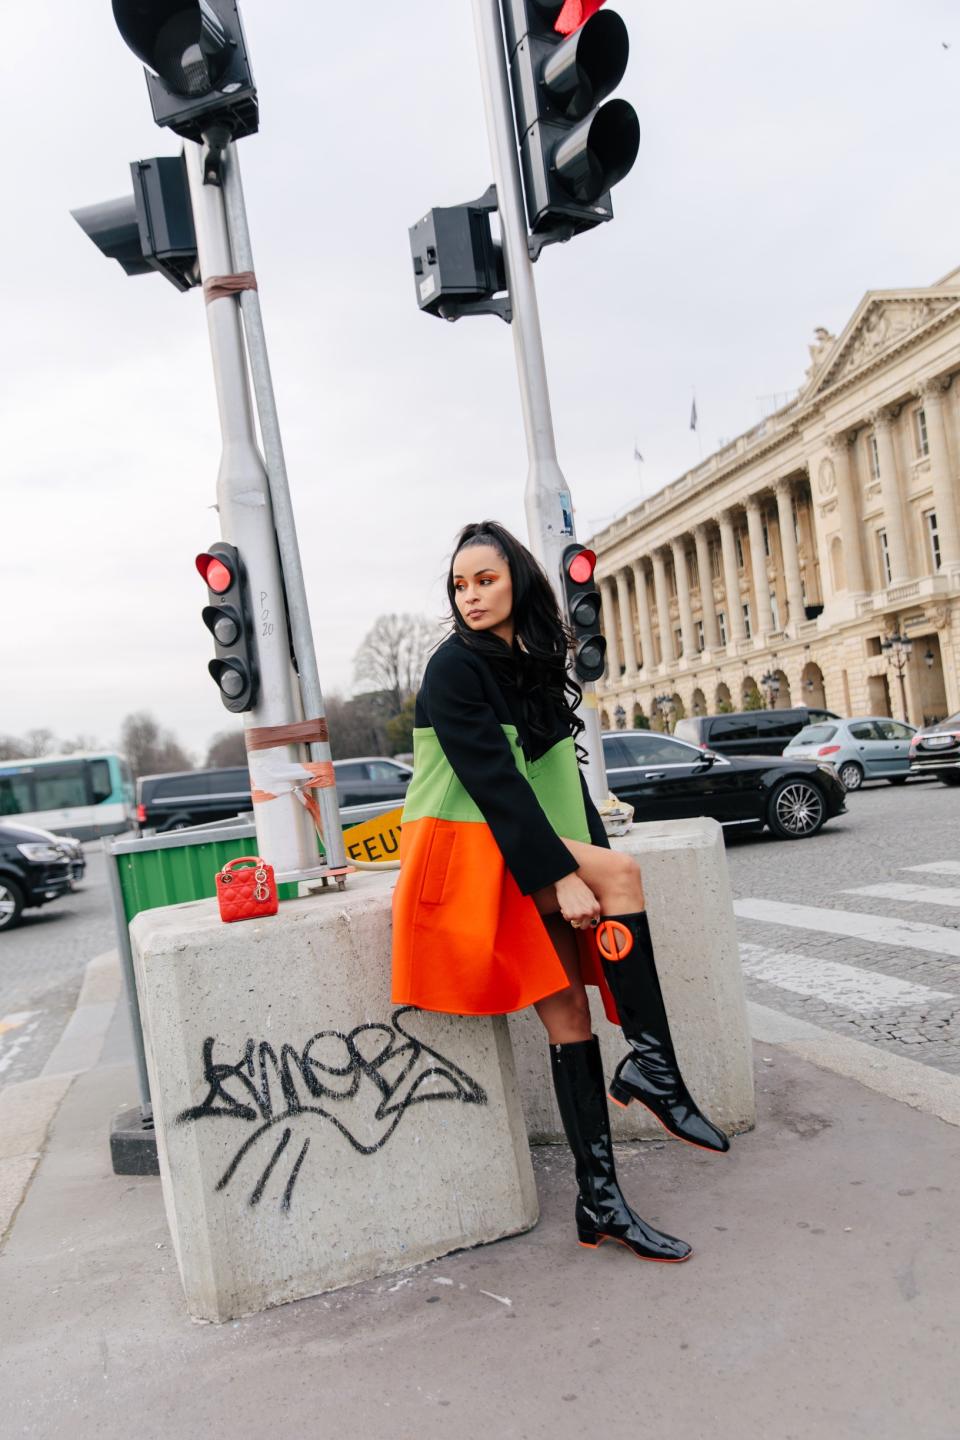 Sai De Silva in Paris wearing Christian Dior’s coat and boots with rubberized detailing. - Credit: Allie Provost